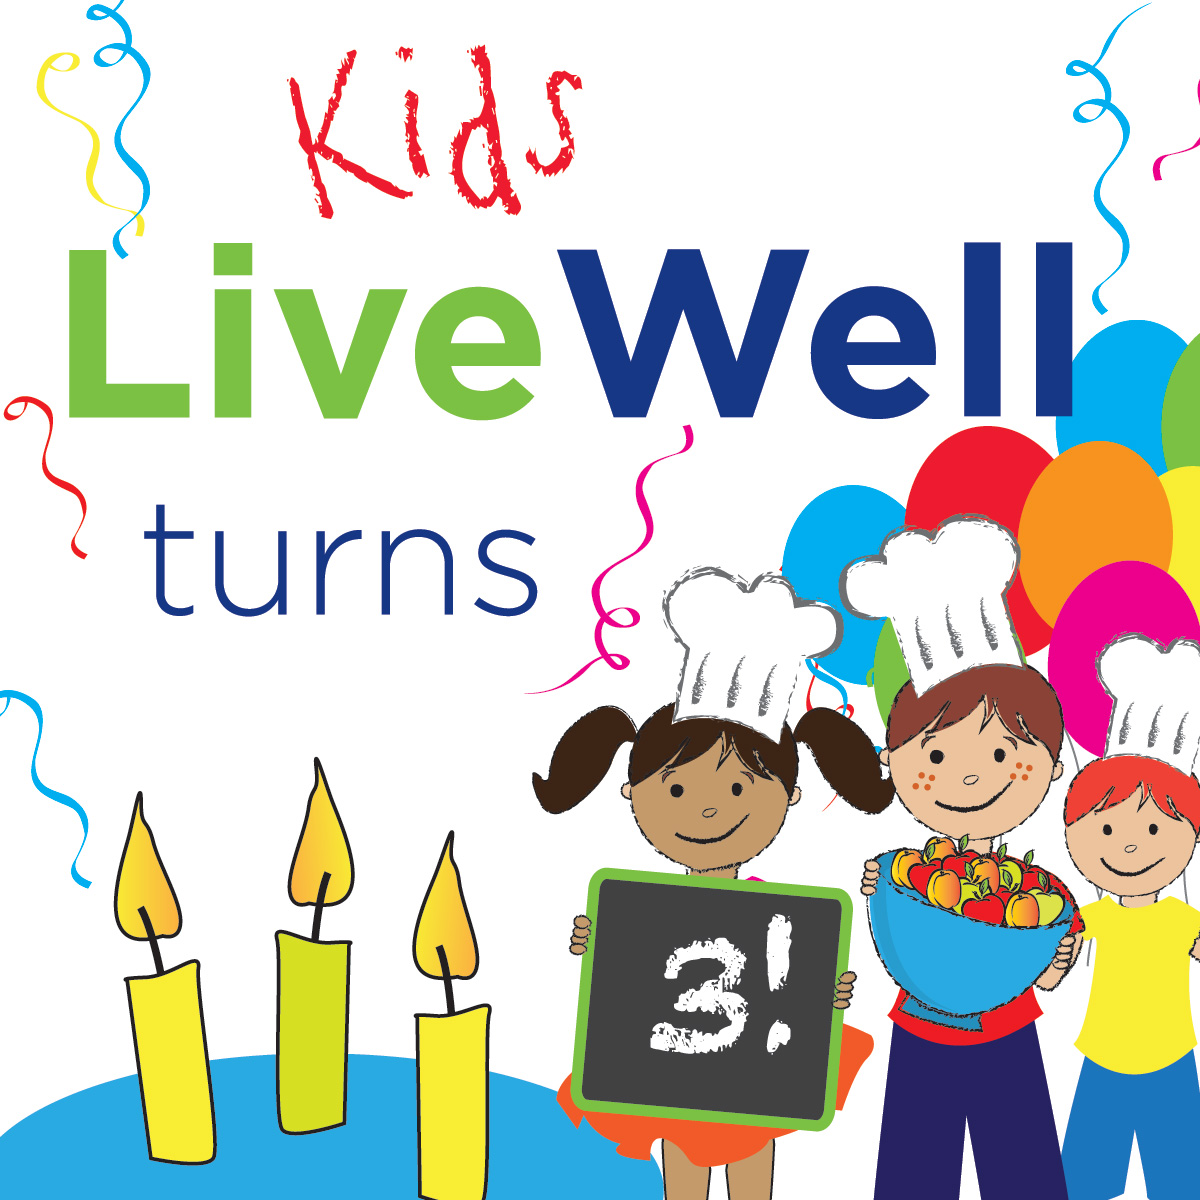 The Kids LiveWell program helps make the healthful choice the easy choice when dining out with children.